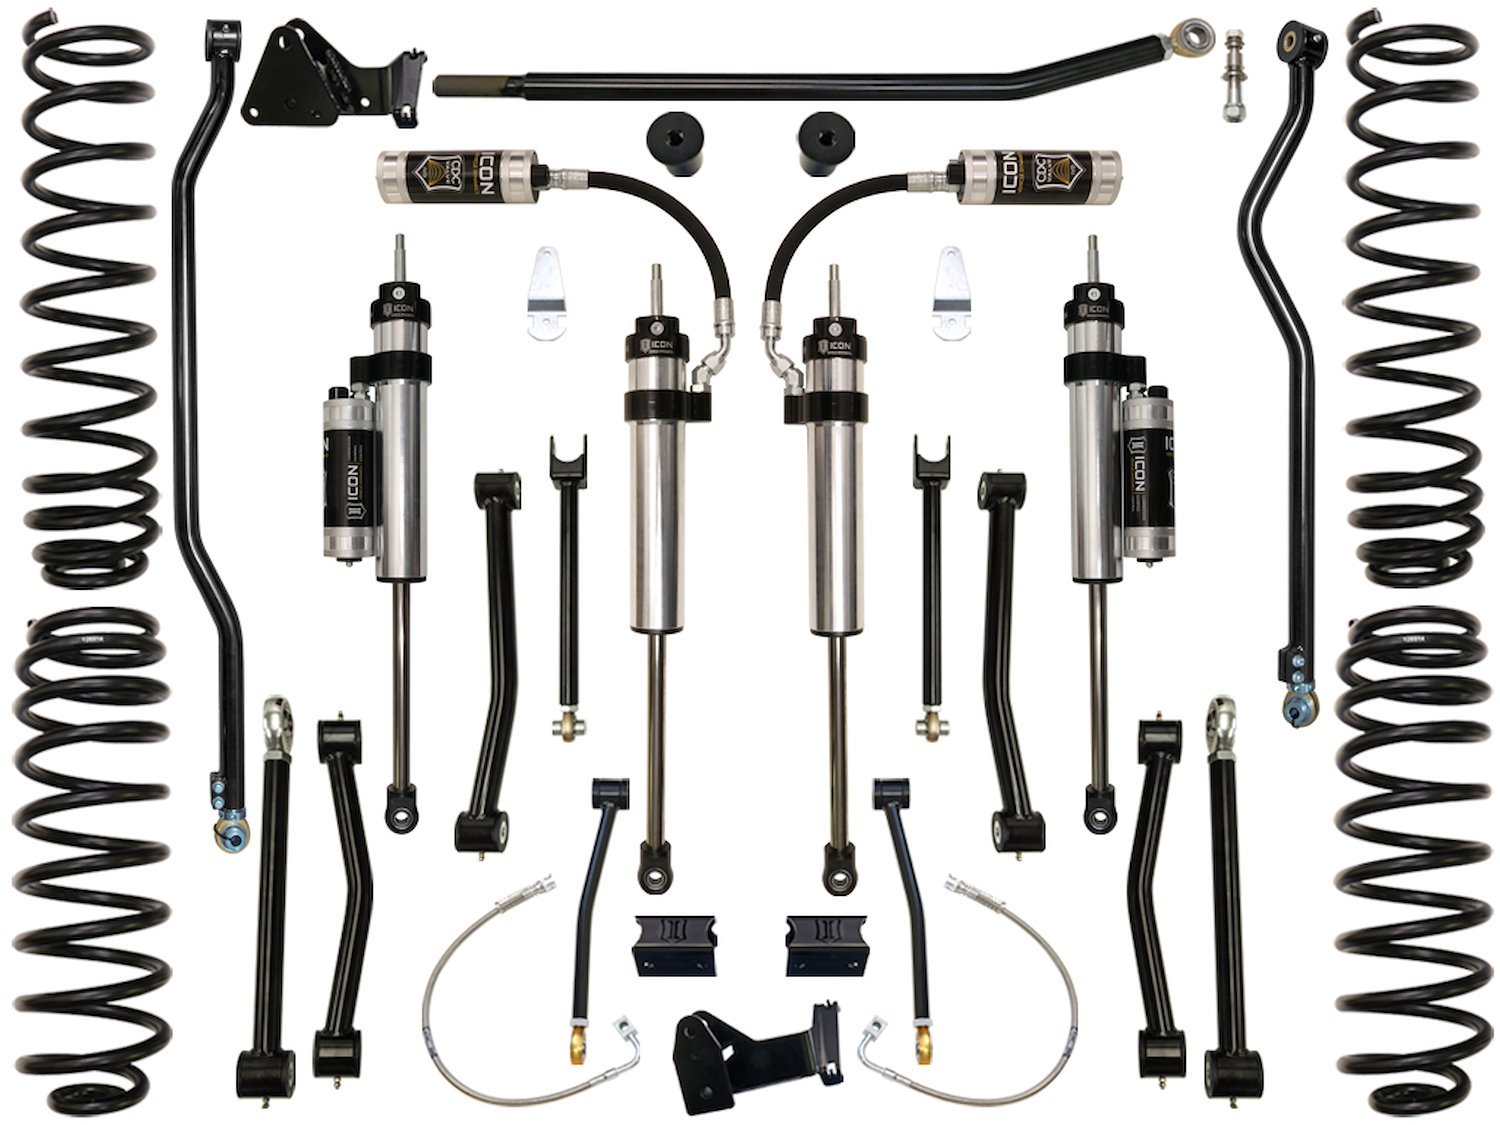 K24004 Front and Rear Suspension Lift Kit, Lift Amount: 4.5 in. Front/4.5 in. Rear